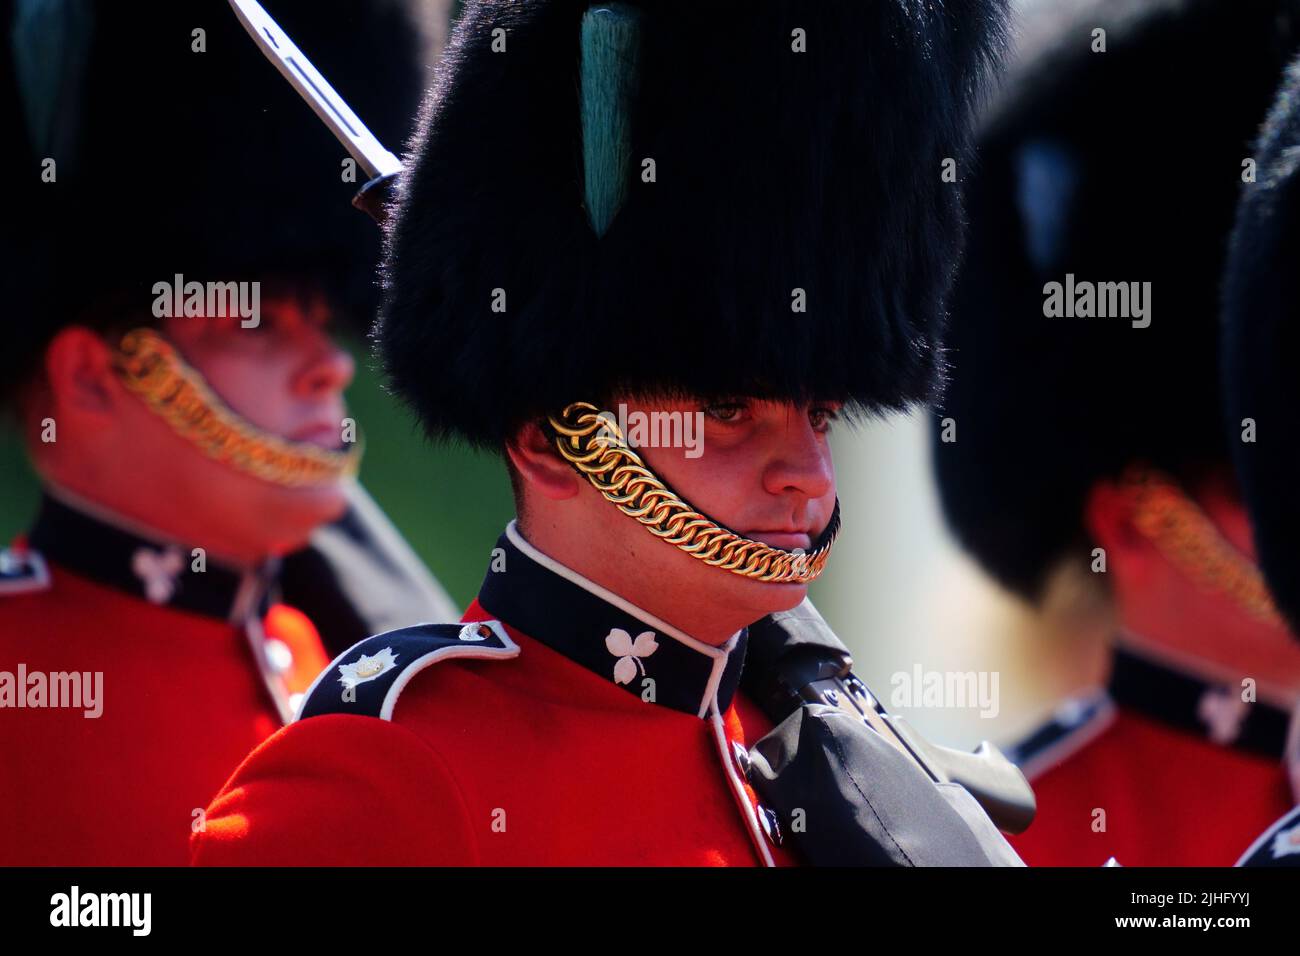 A member of The Queen's Guard takes part in the Changing the Guard ceremony on The Mall in front of Buckingham Palace in London during the UK's first red extreme heat warning. The UK is facing travel disruption, closed schools and health warnings as the country braces for extreme heat over the next two days with temperatures set to soar into the high 30s in some areas on Monday, while Tuesday is predicted to be even hotter. Picture date: Monday July 18, 2022. Stock Photo